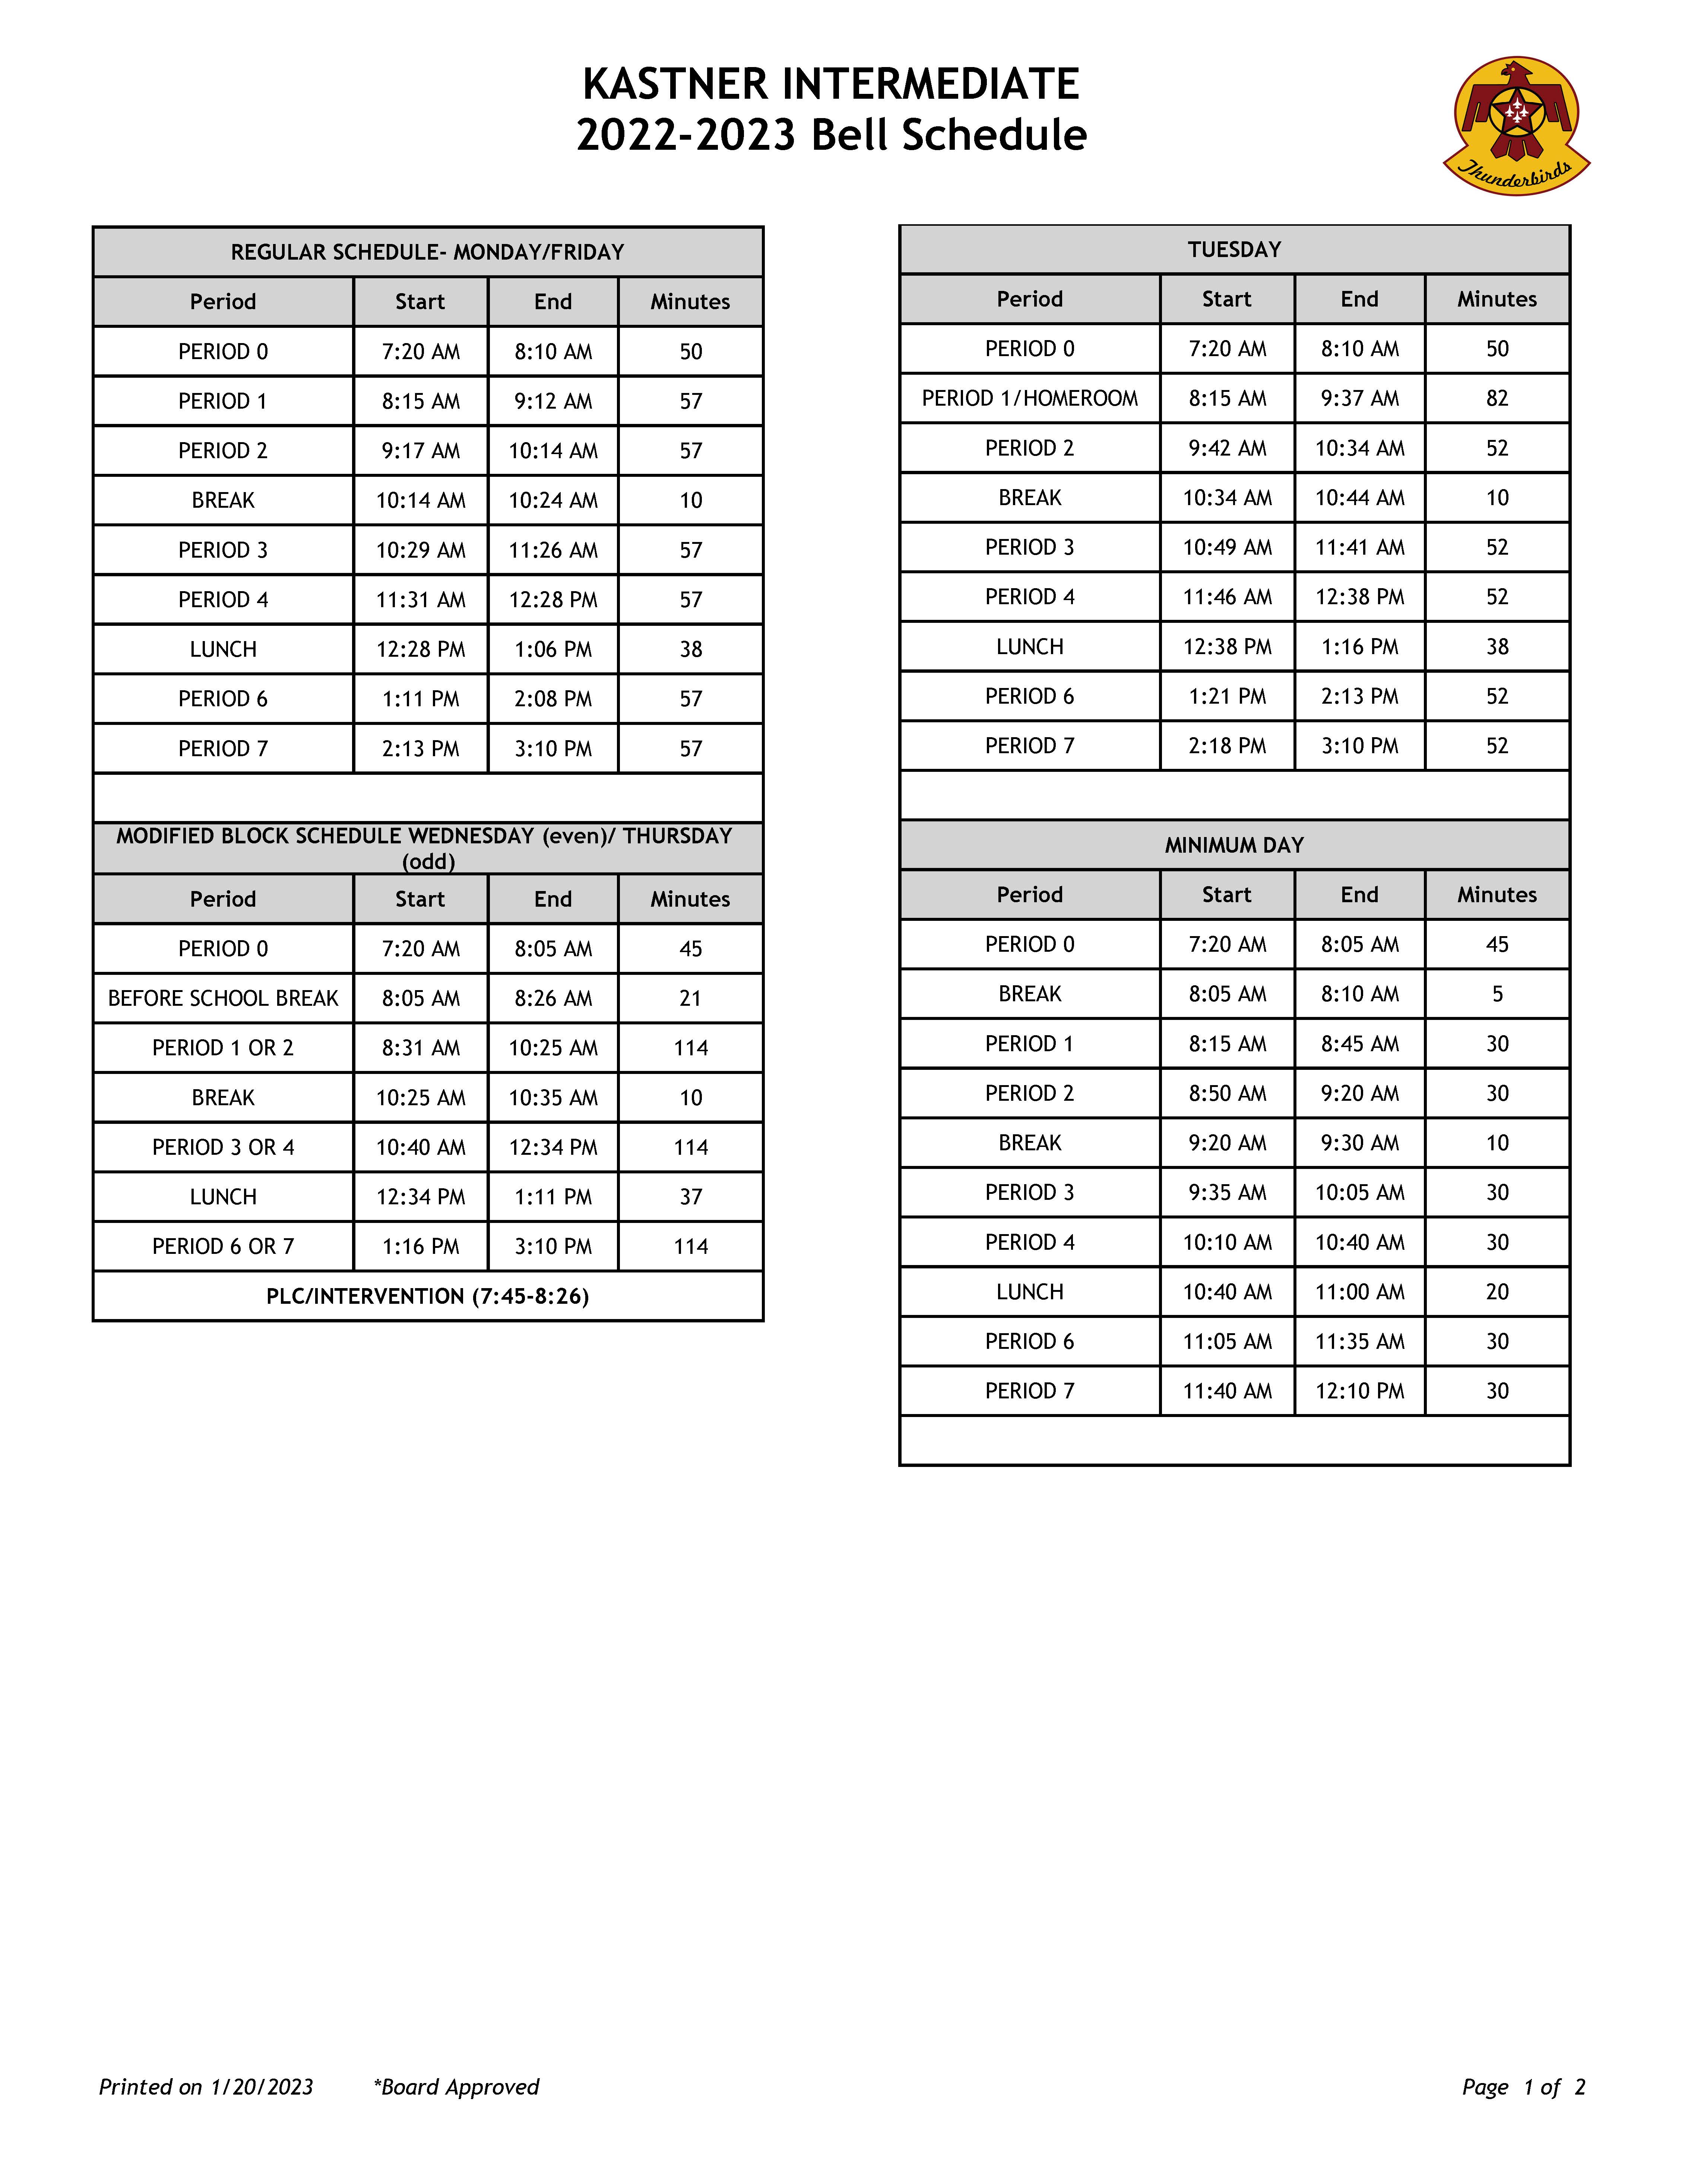 bell schedule 22-23 page 1